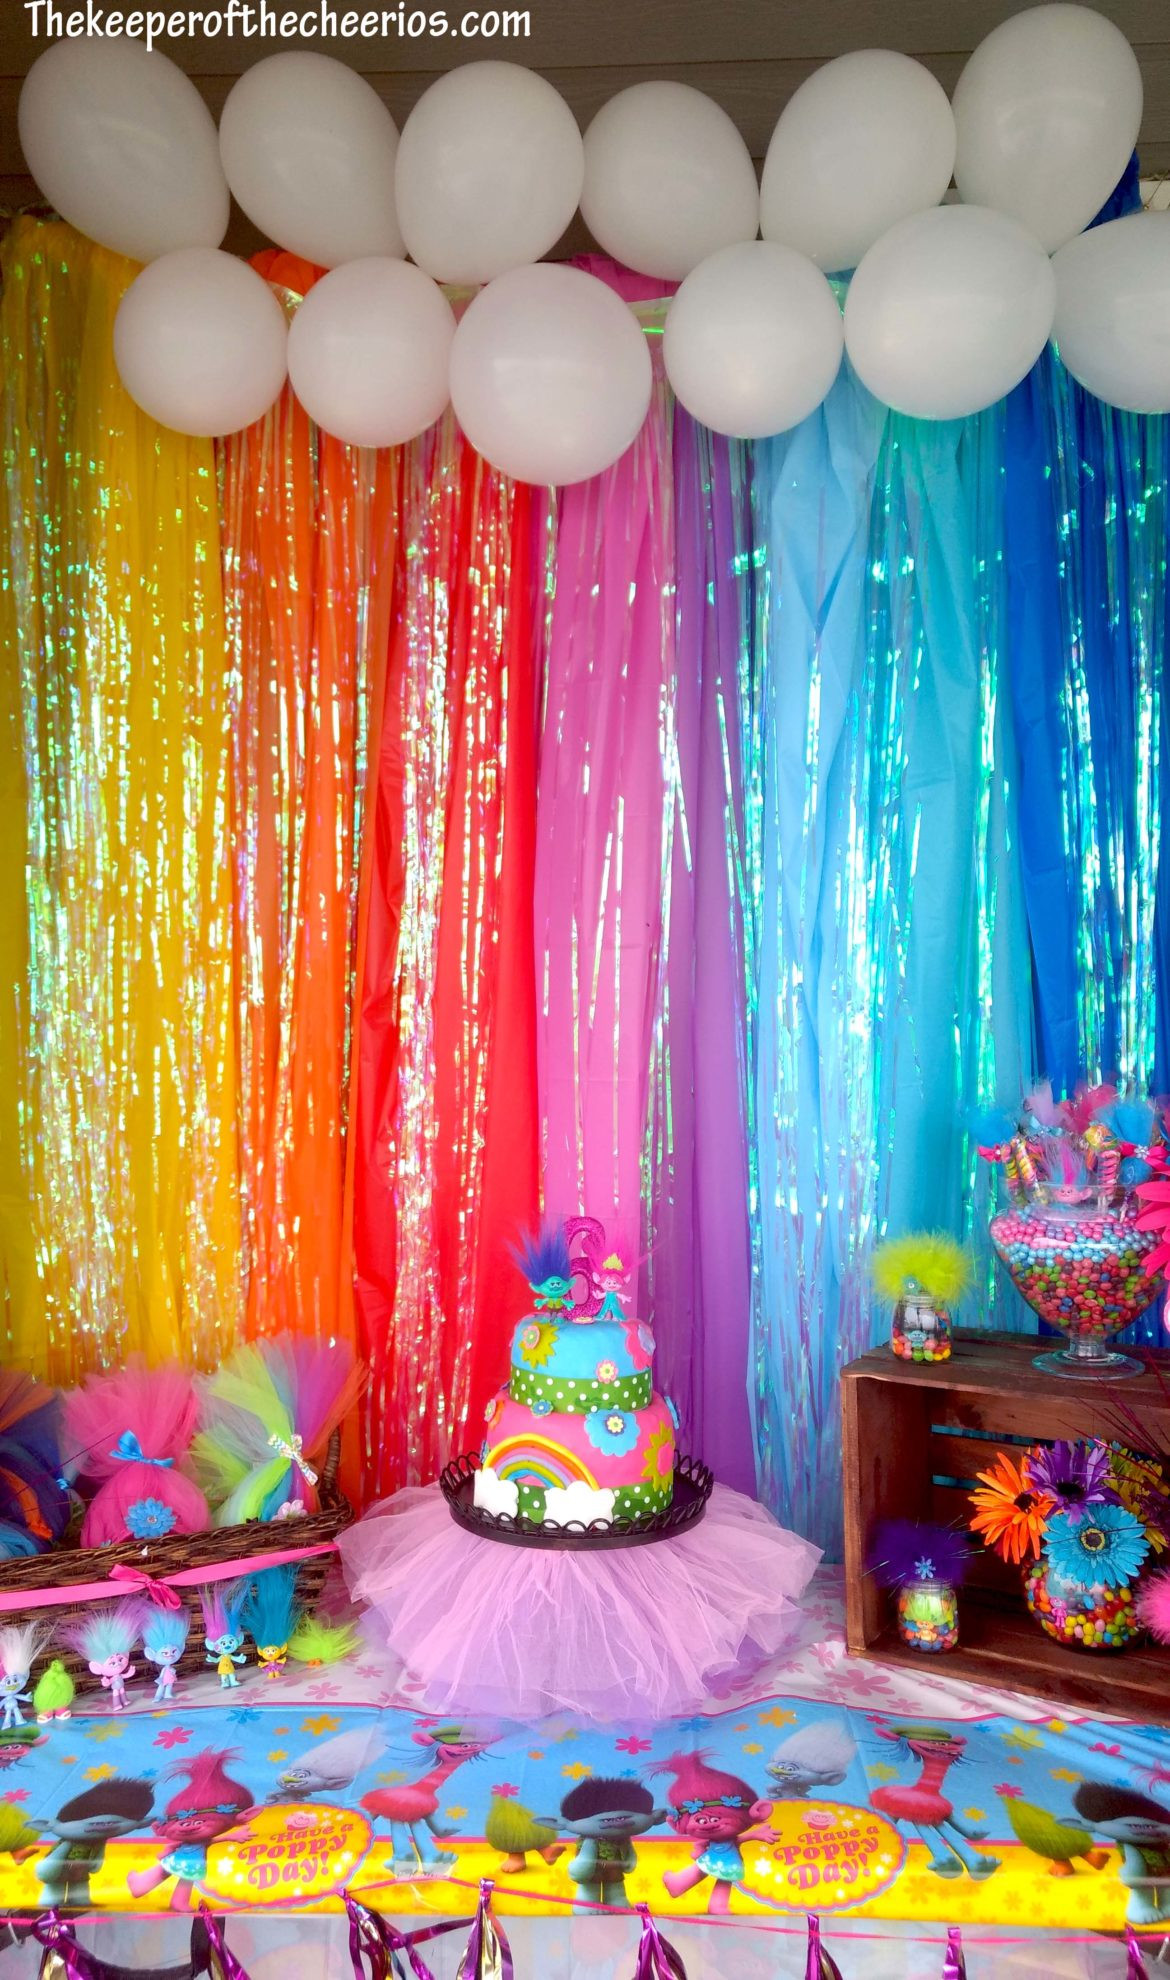 Trolls Party Decoration Ideas
 Trolls Birthday Party The Keeper of the Cheerios